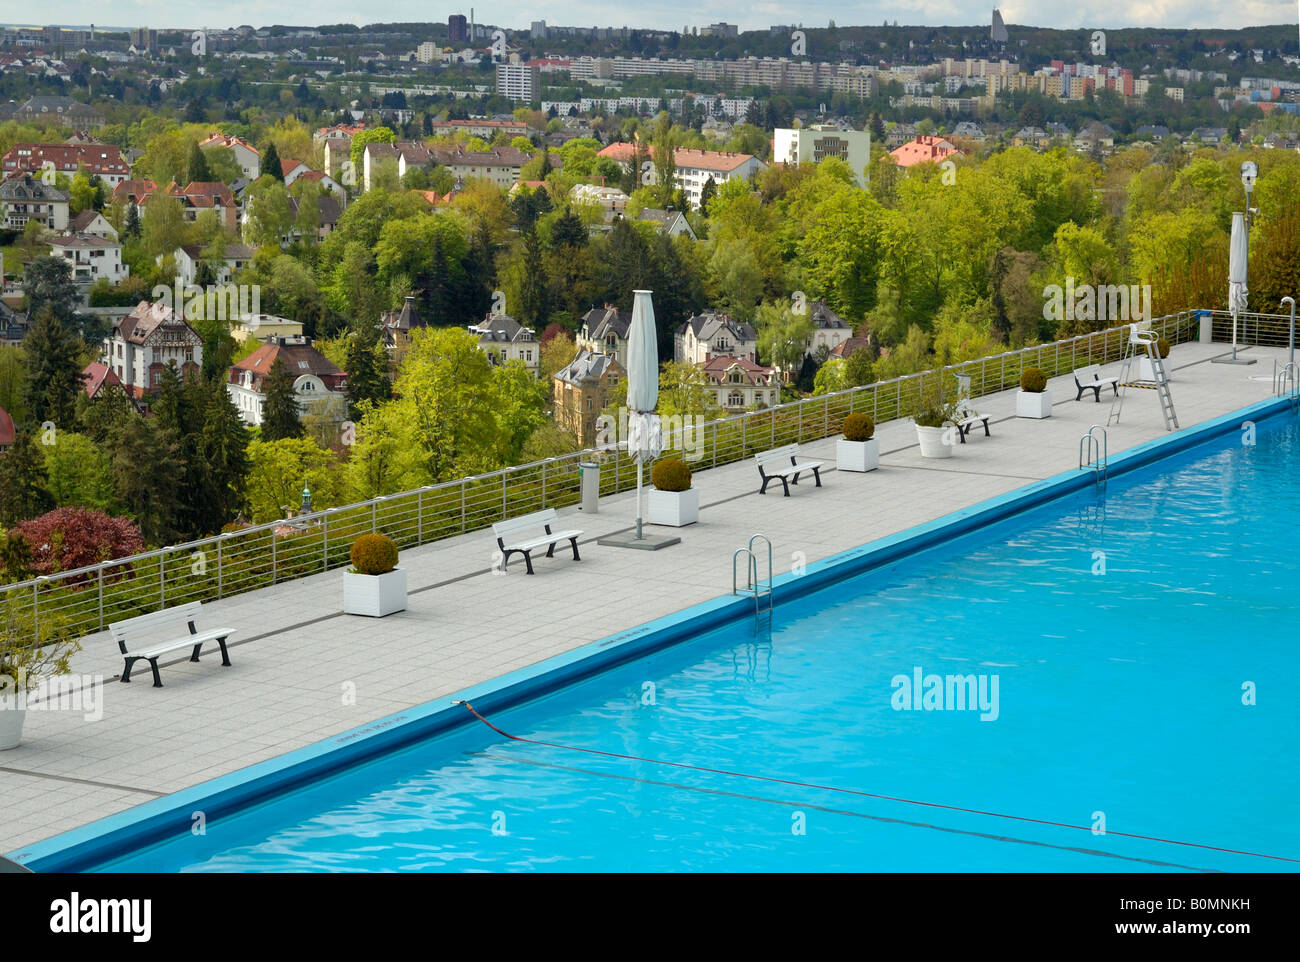 'Opel Bad' swimming pool above the Villa district of Wiesbaden, Germany. Stock Photo